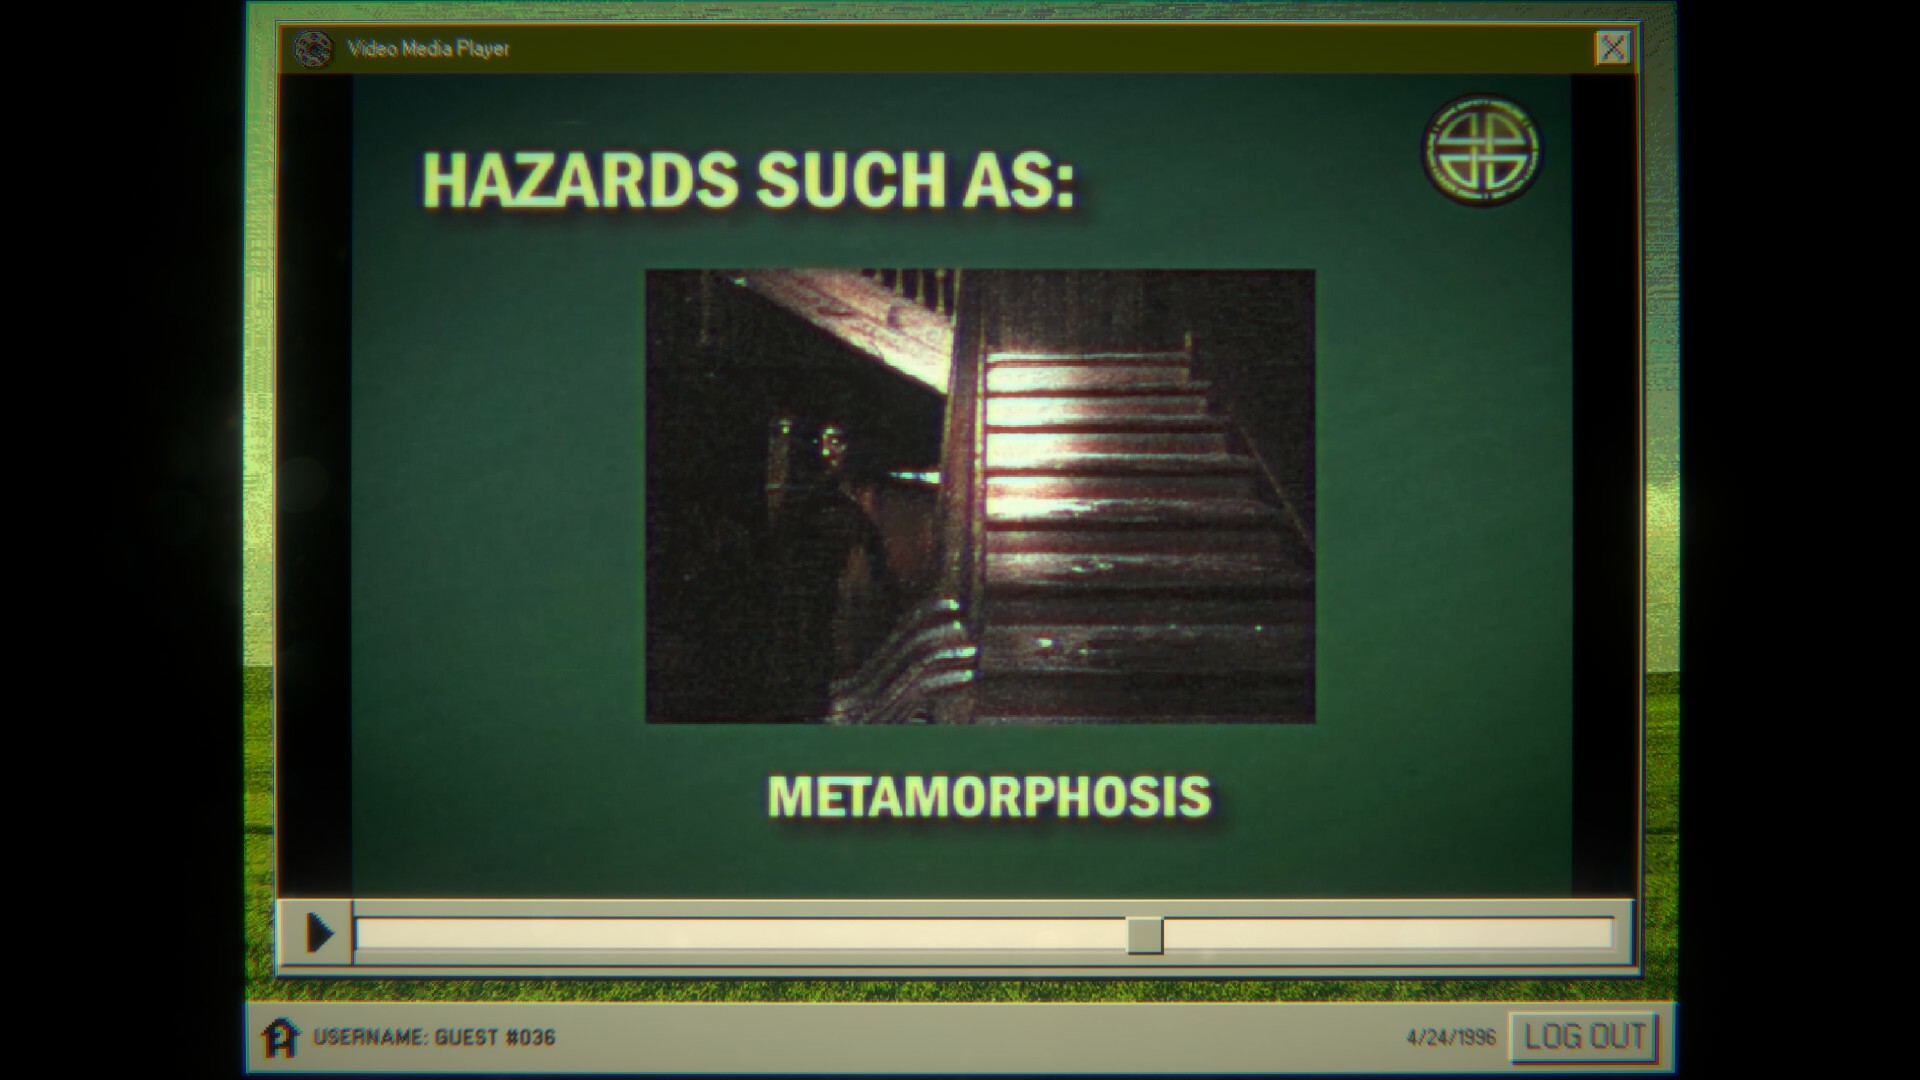 Image: A computer from 1996, showing a slide from part of a presentation that reads: “Hazards such as: metamorphosis”, with a scary photo of some kind of monster lurking behind stairs.